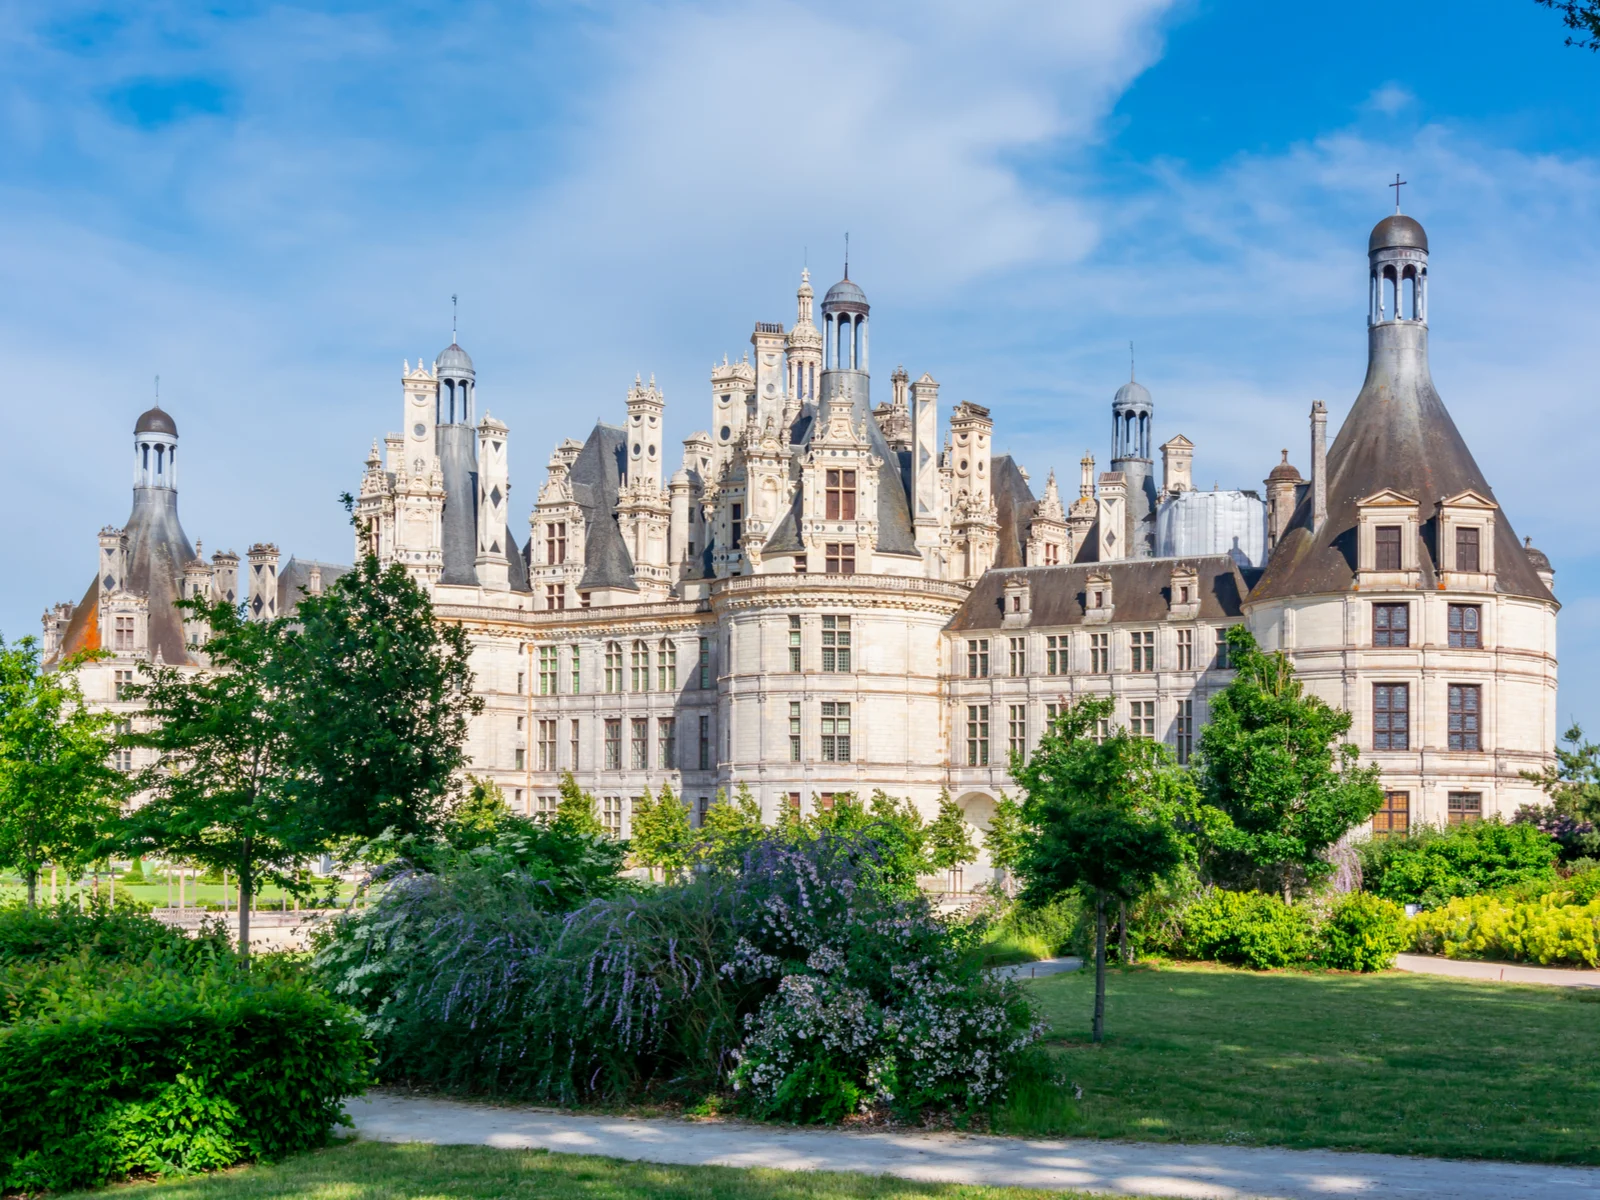 Chambord Castle pictured on a sunny day during the least busy time to visit France